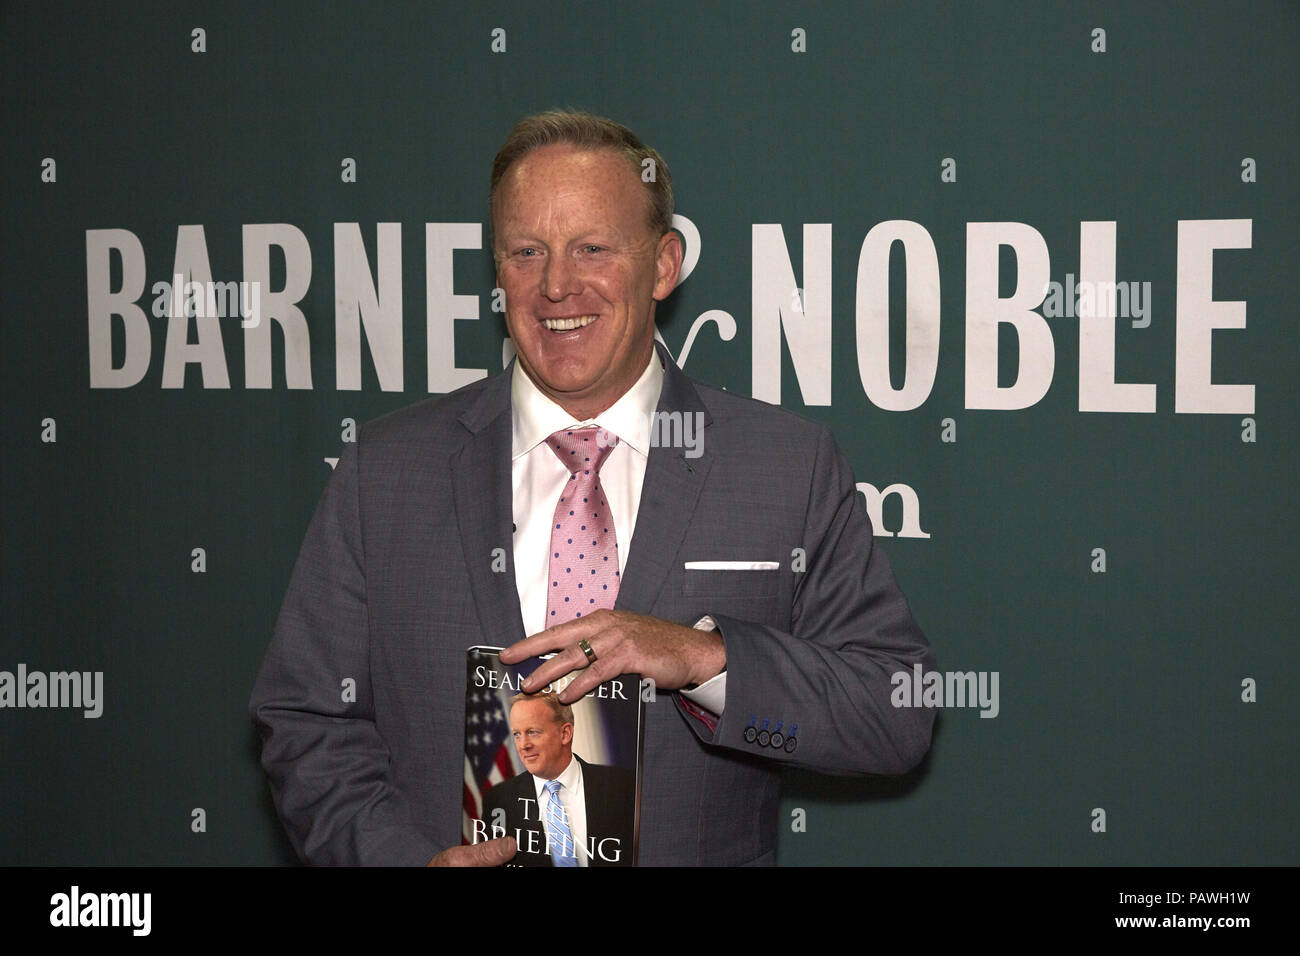 New York, New York, USA. 25th July, 2018. Sean Spicer, The Briefing, book signing and talk at Barnes and Noble, Union Square Book Store, New York, NY USA Credit: Mark J. Sullivan/ZUMA Wire/Alamy Live News Stock Photo